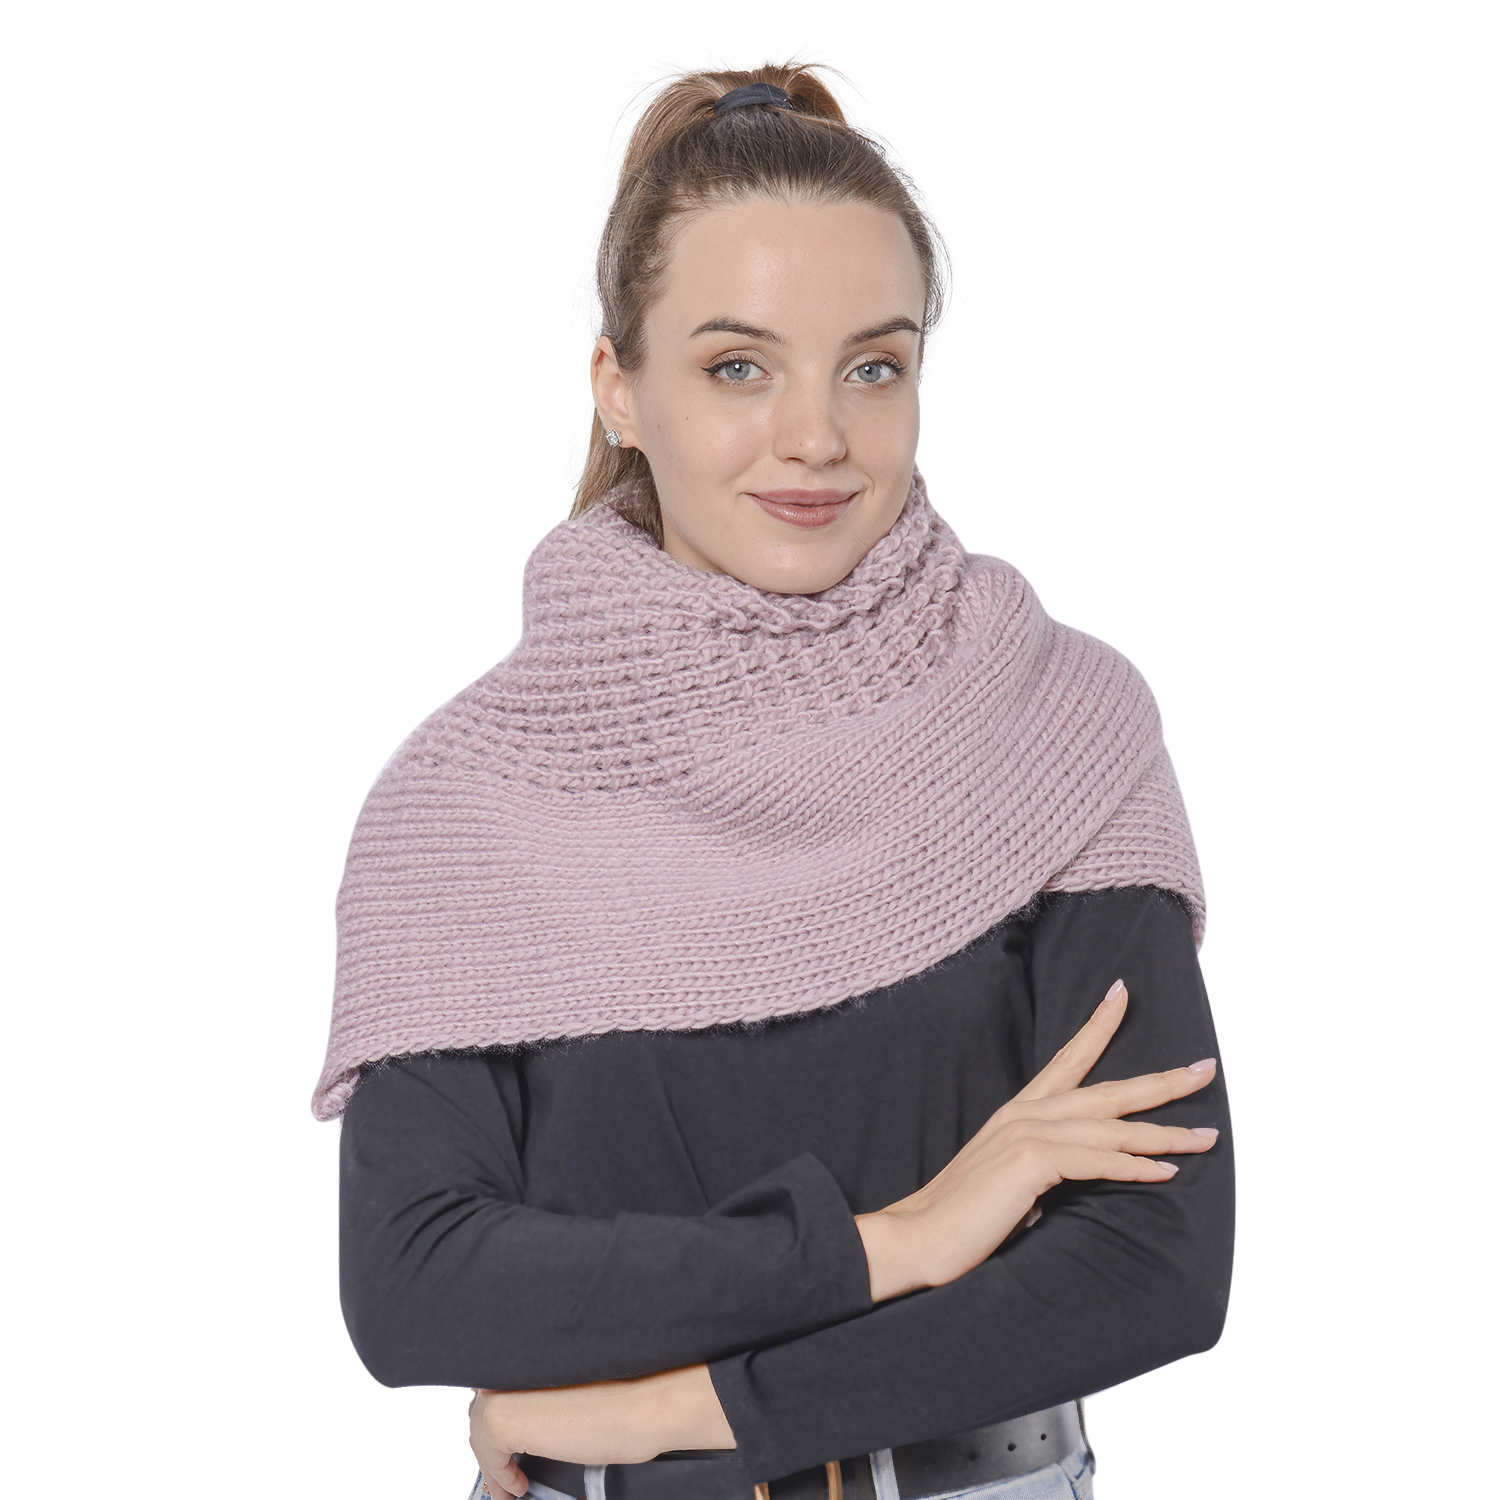 Solid Dusty Pink Infinity Knit Scarf (Size 32x70cm)